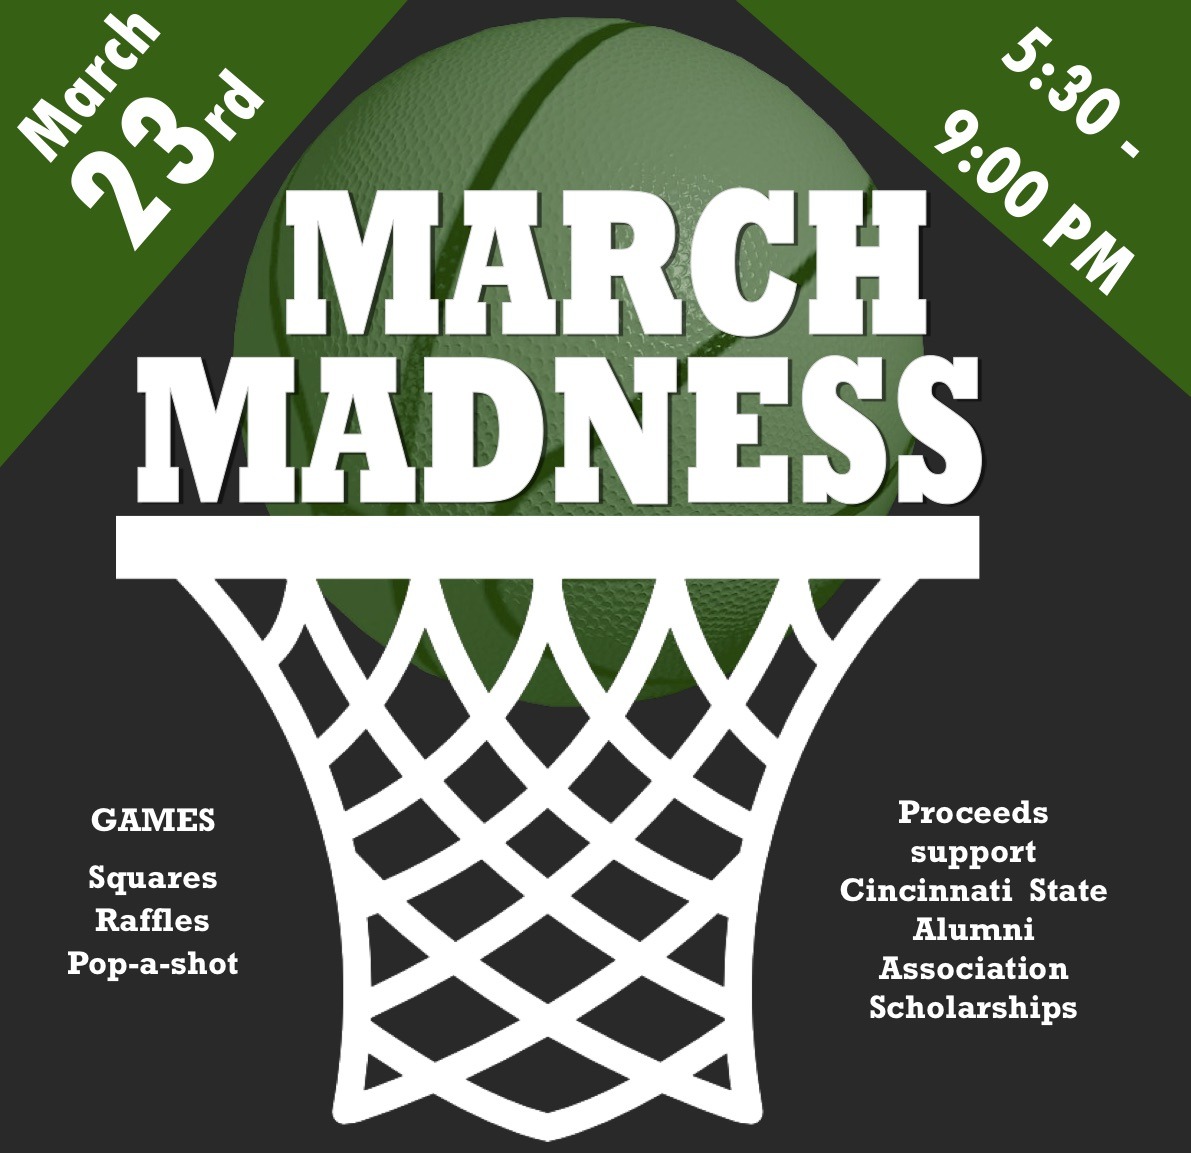 Alumni Association March Madness party flyer